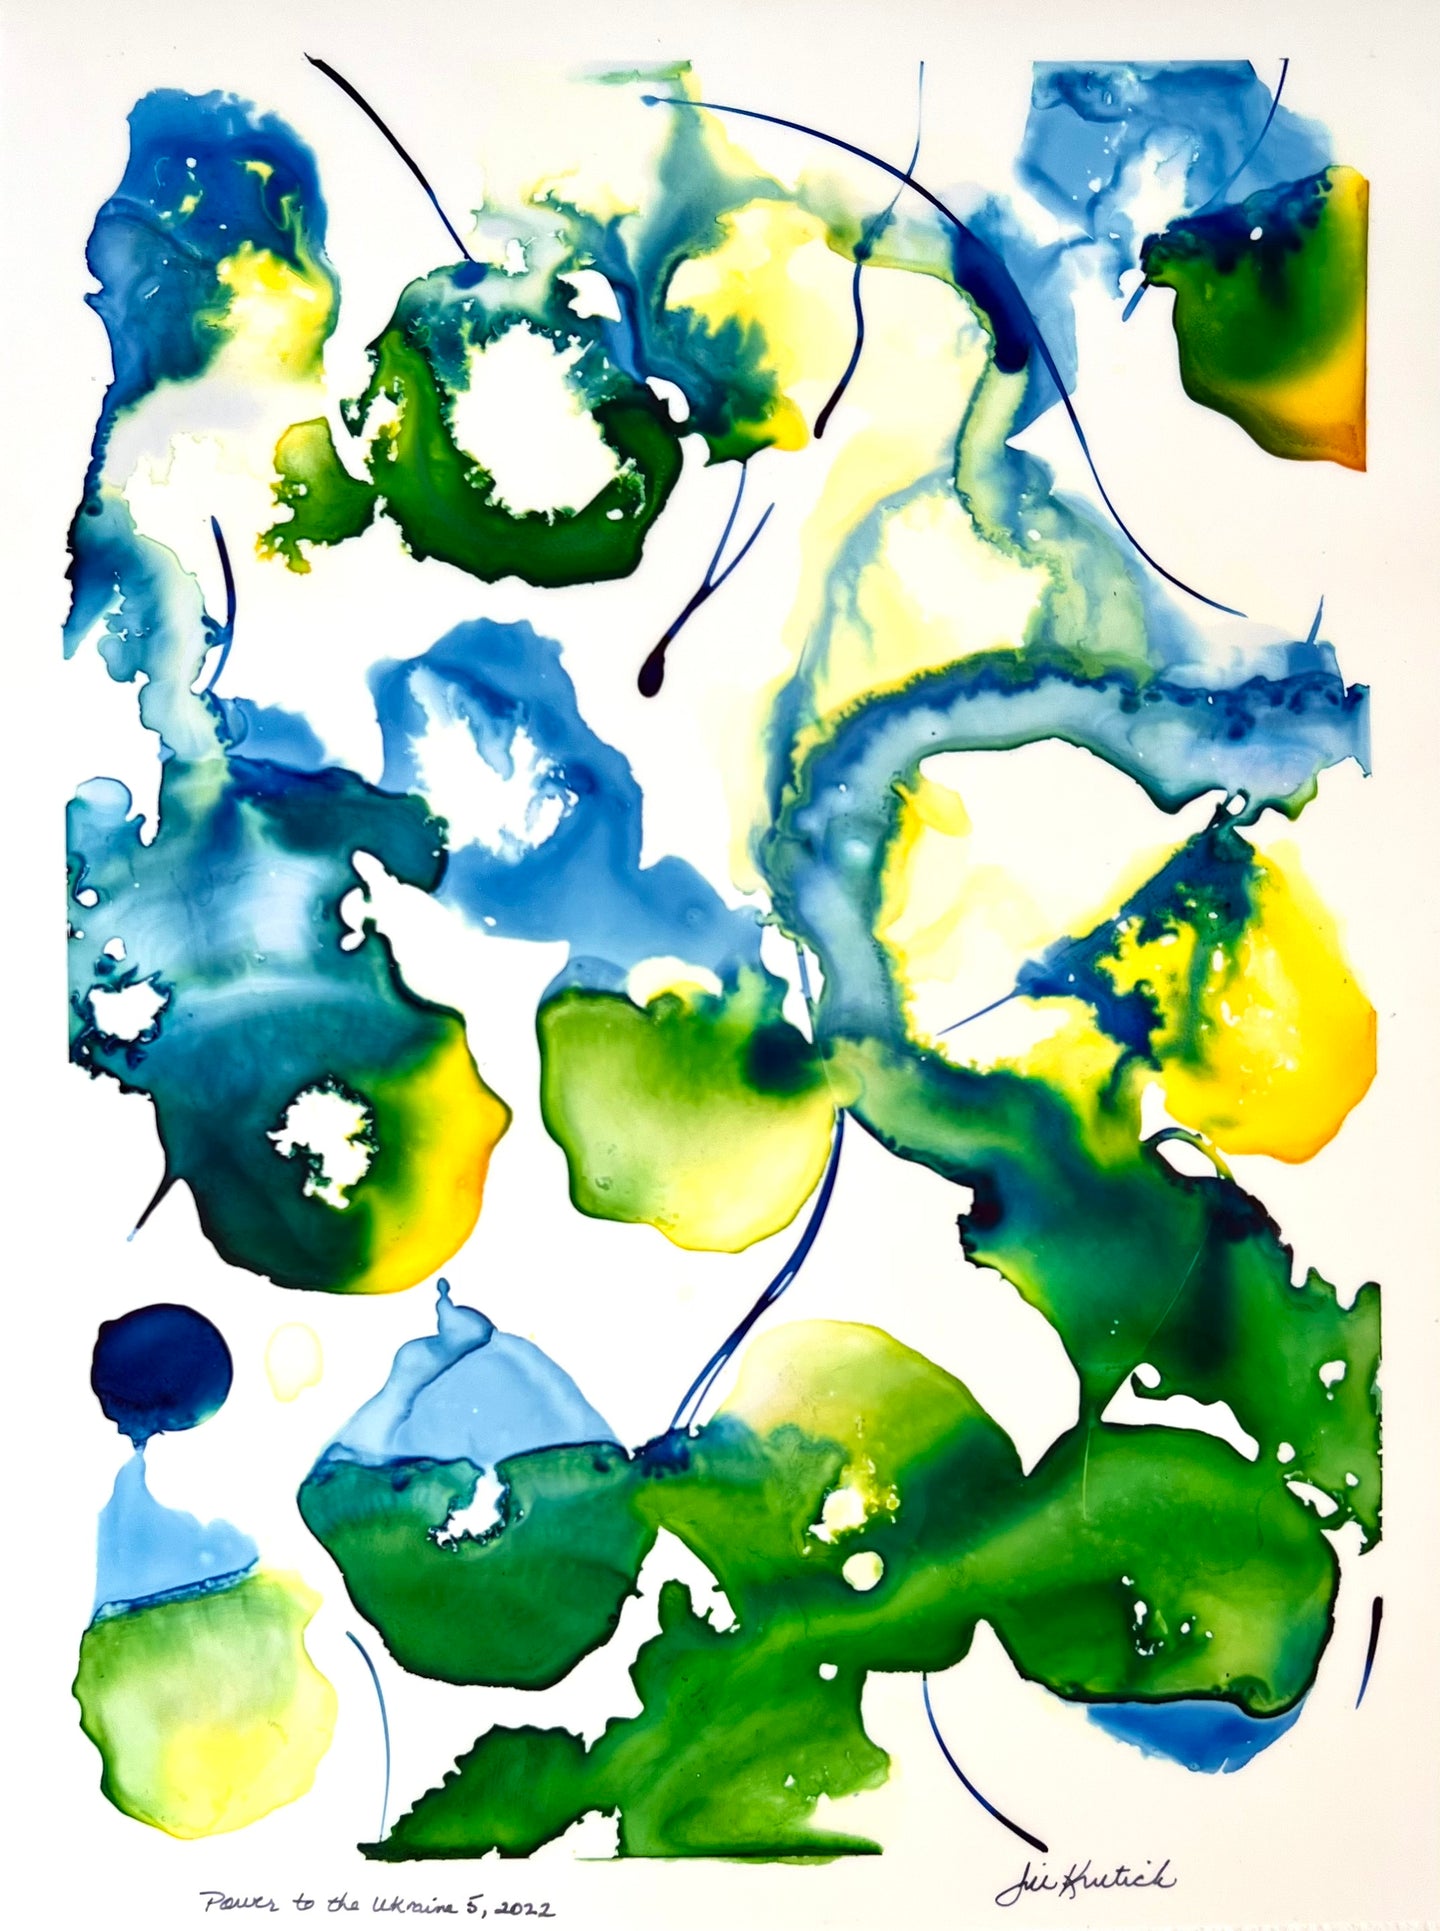 Jill Krutick’s Blue and Yellow Abstract Painting for the Ritz Carlton South Beach, Power to Ukraine 5, 2022, Watercolor and acrlyic painting on paper, 16 x 12 inches, for sale at Manolis Projects